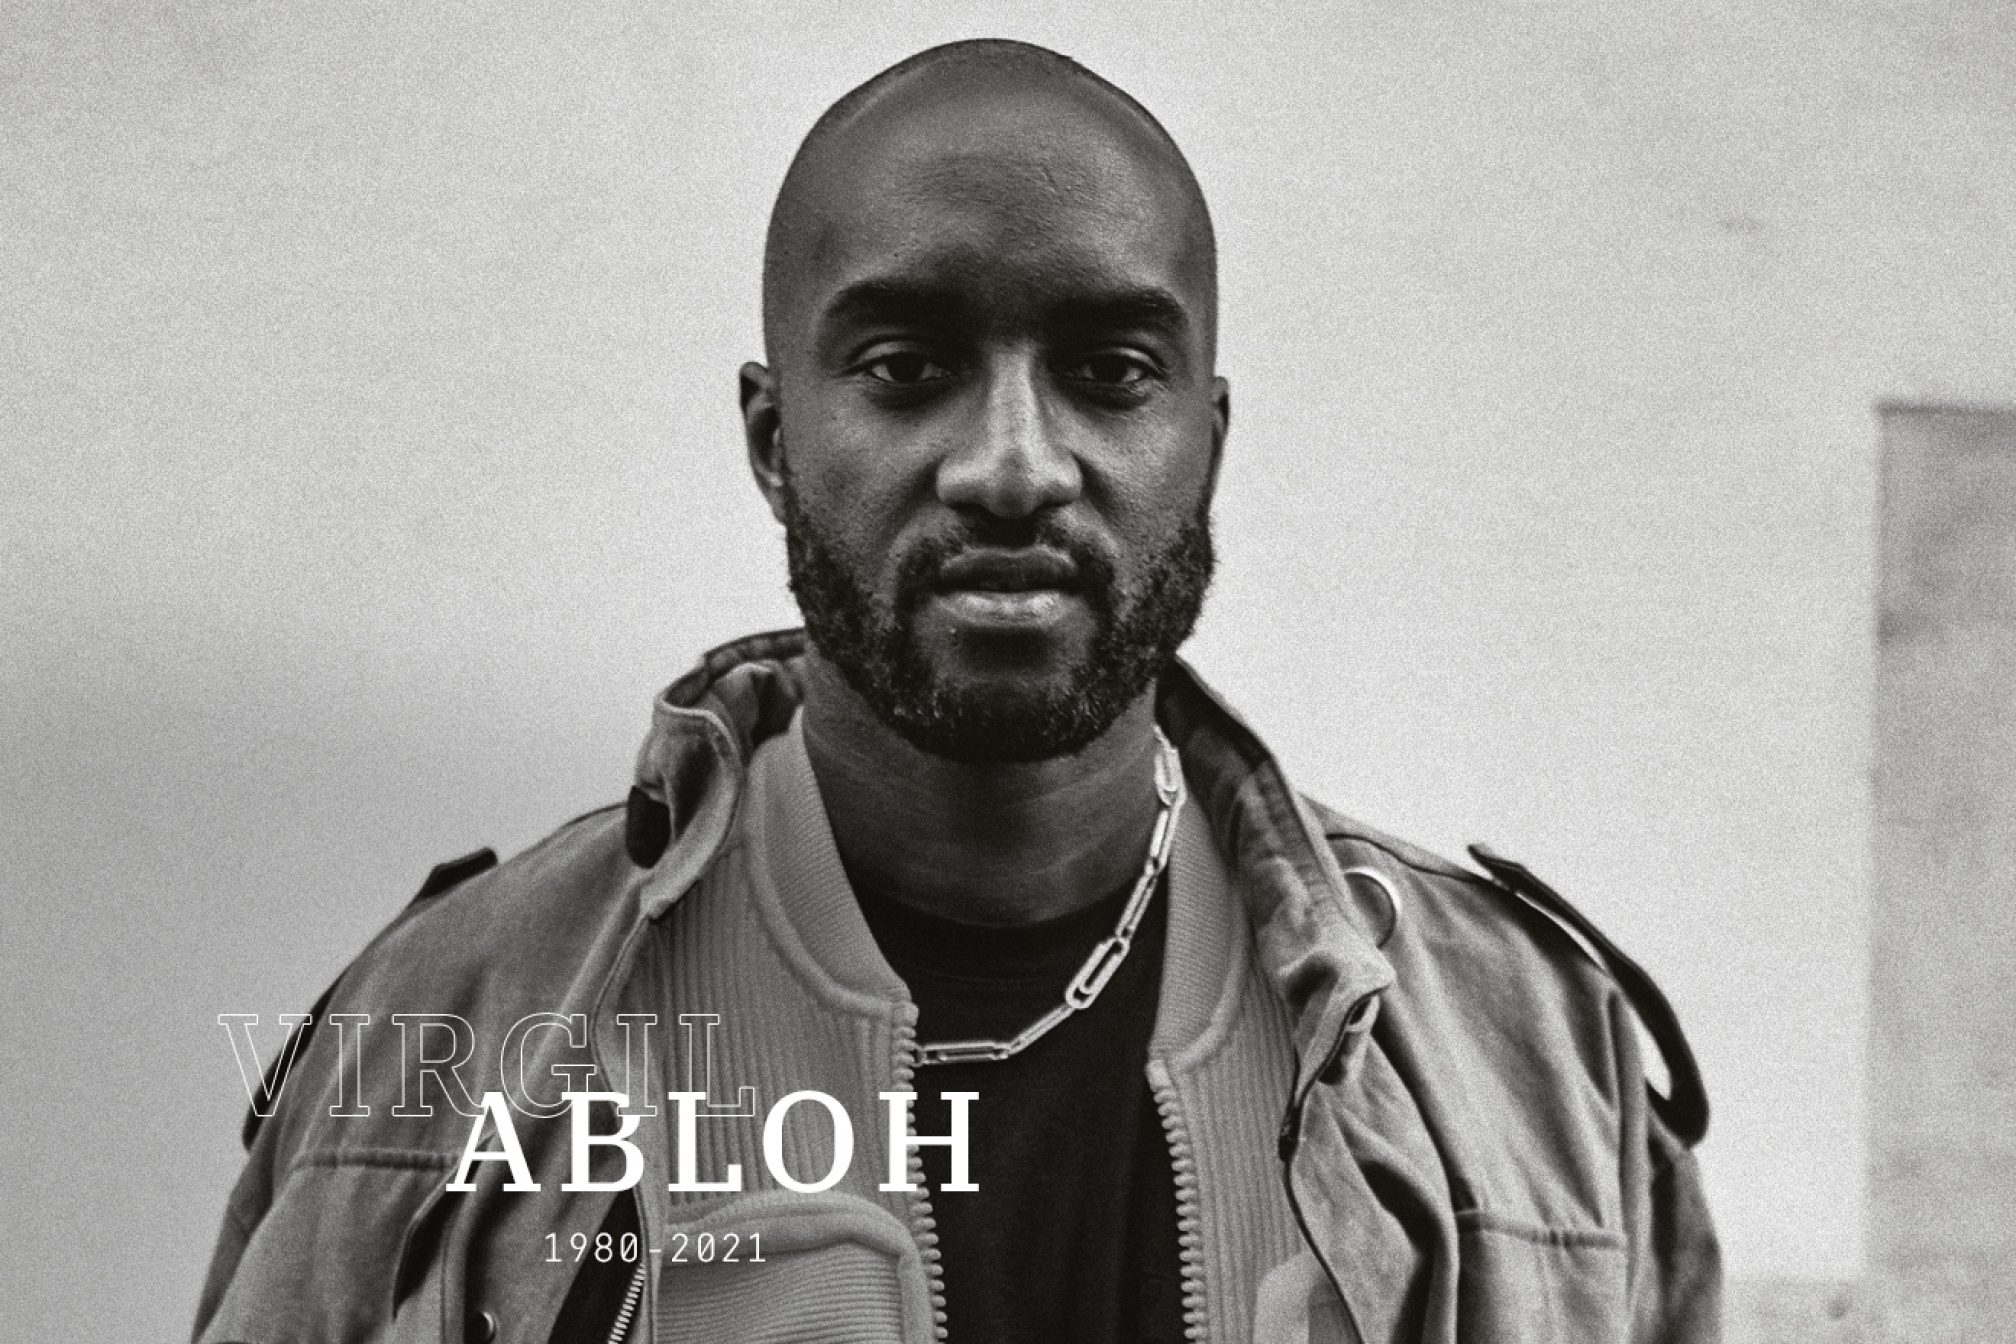 RIP Virgil Abloh: A creative juggernaut who gave generously to the